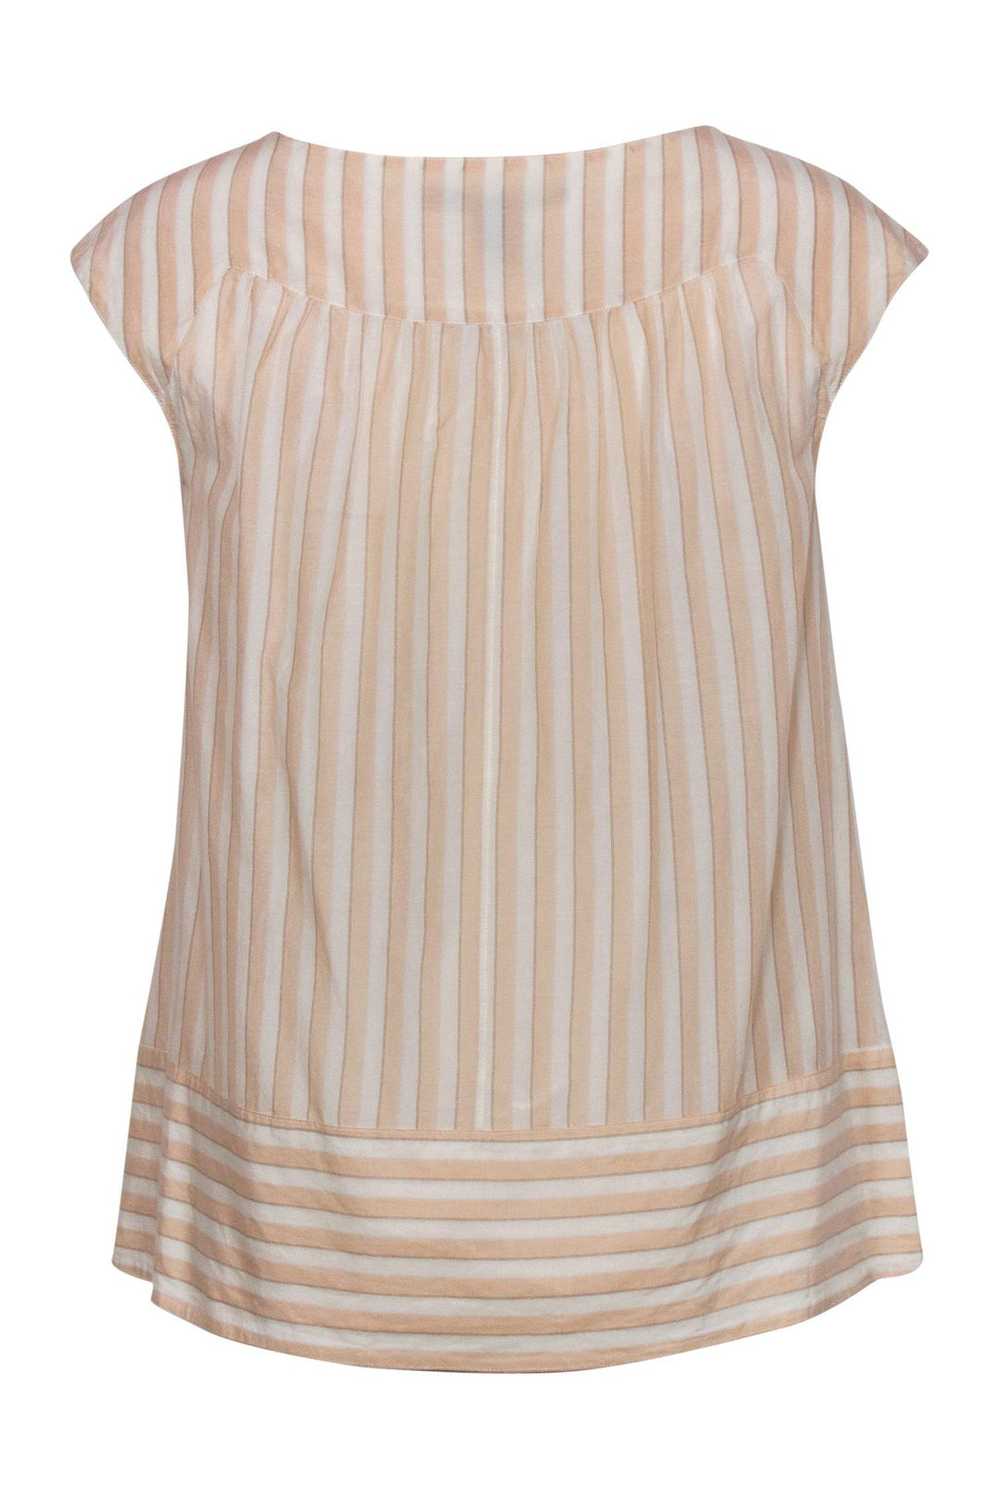 Marc by Marc Jacobs - Light Pink & White Striped … - image 3